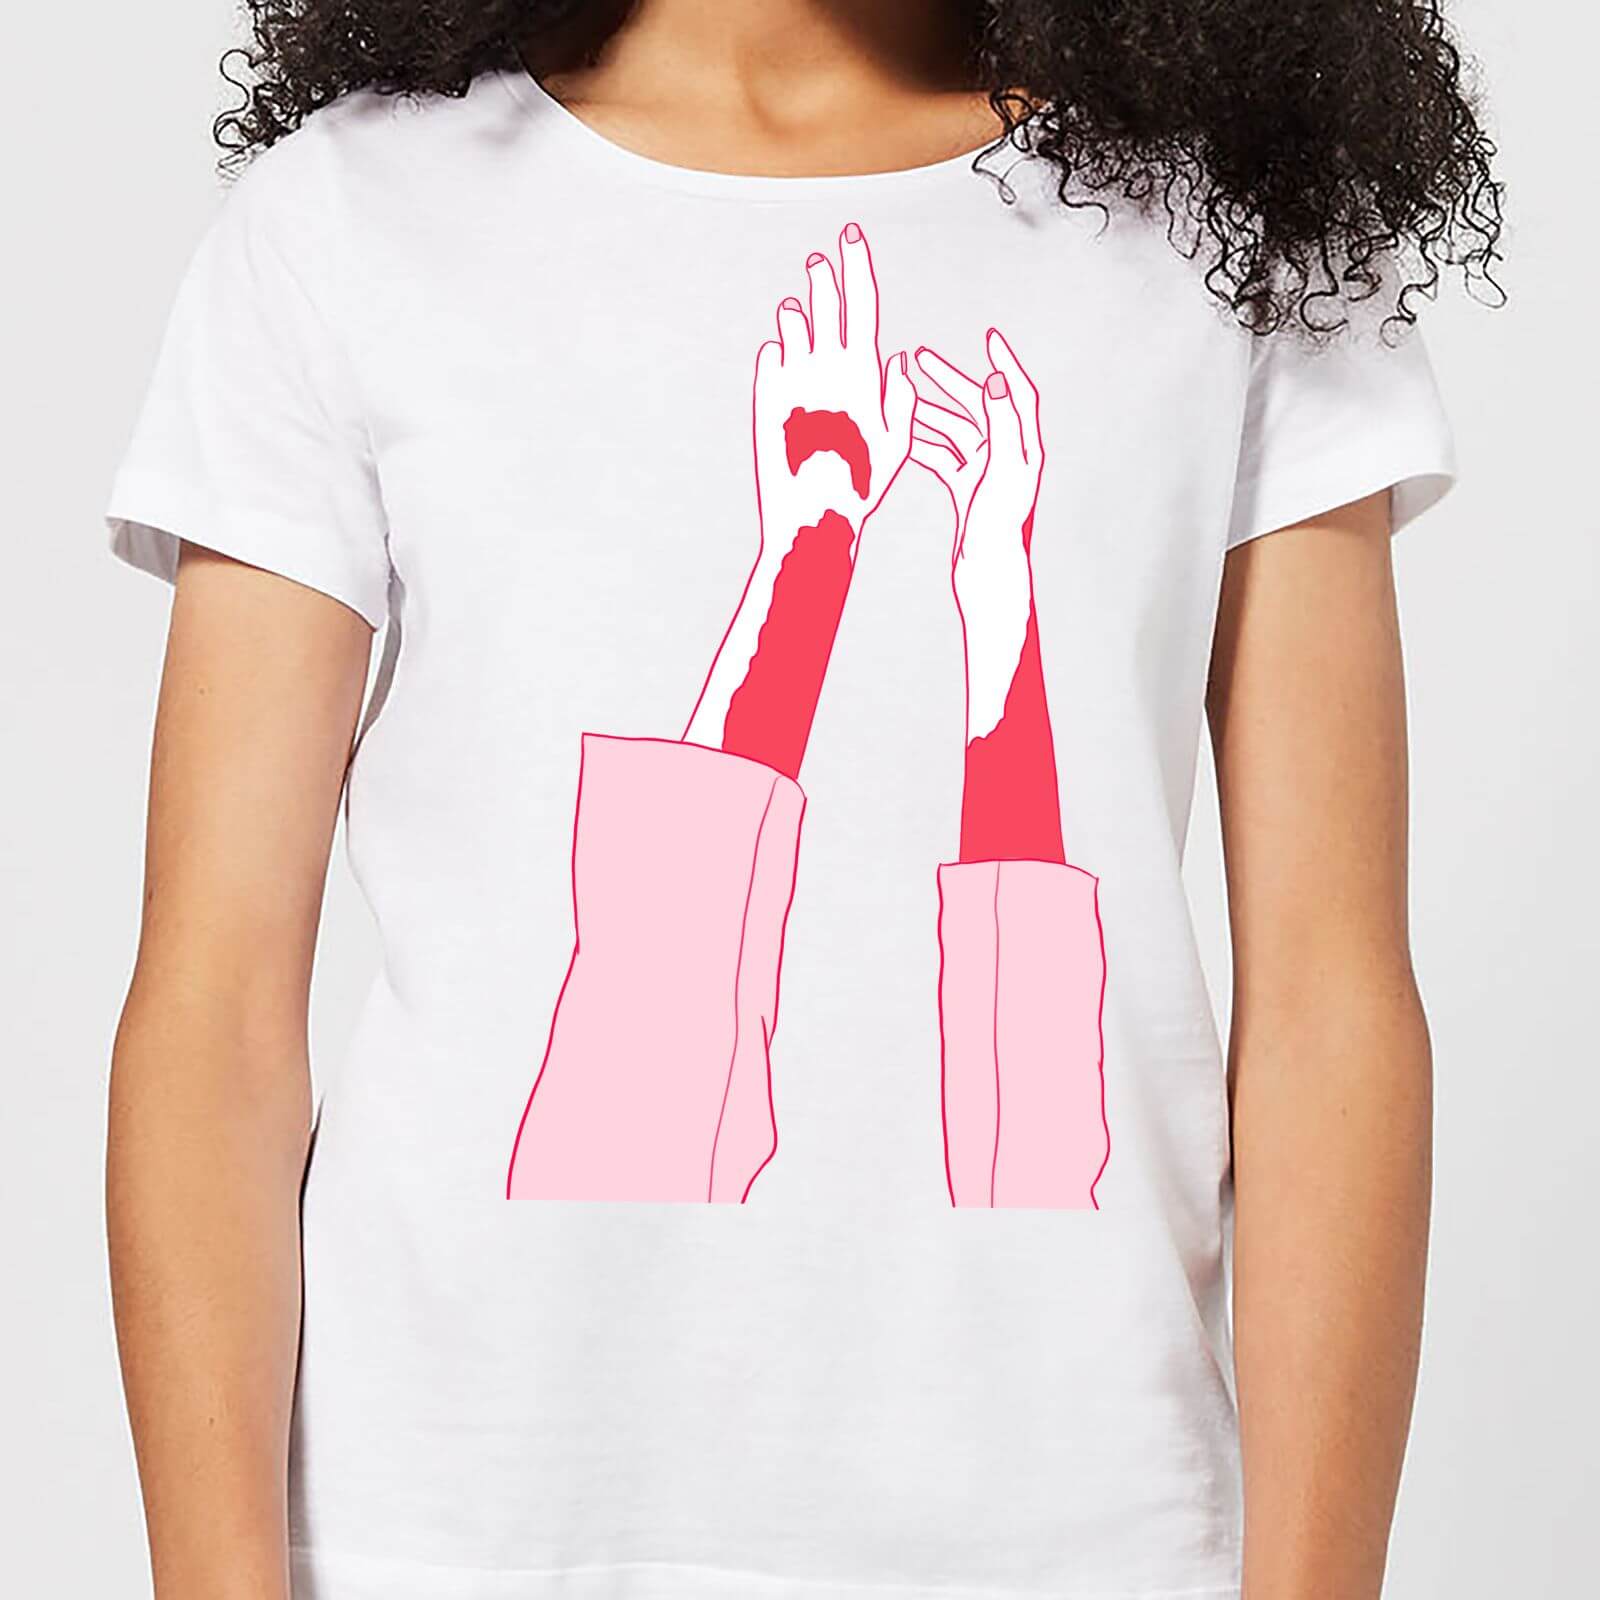 Hands In The Air Women's T-Shirt - White - S - White